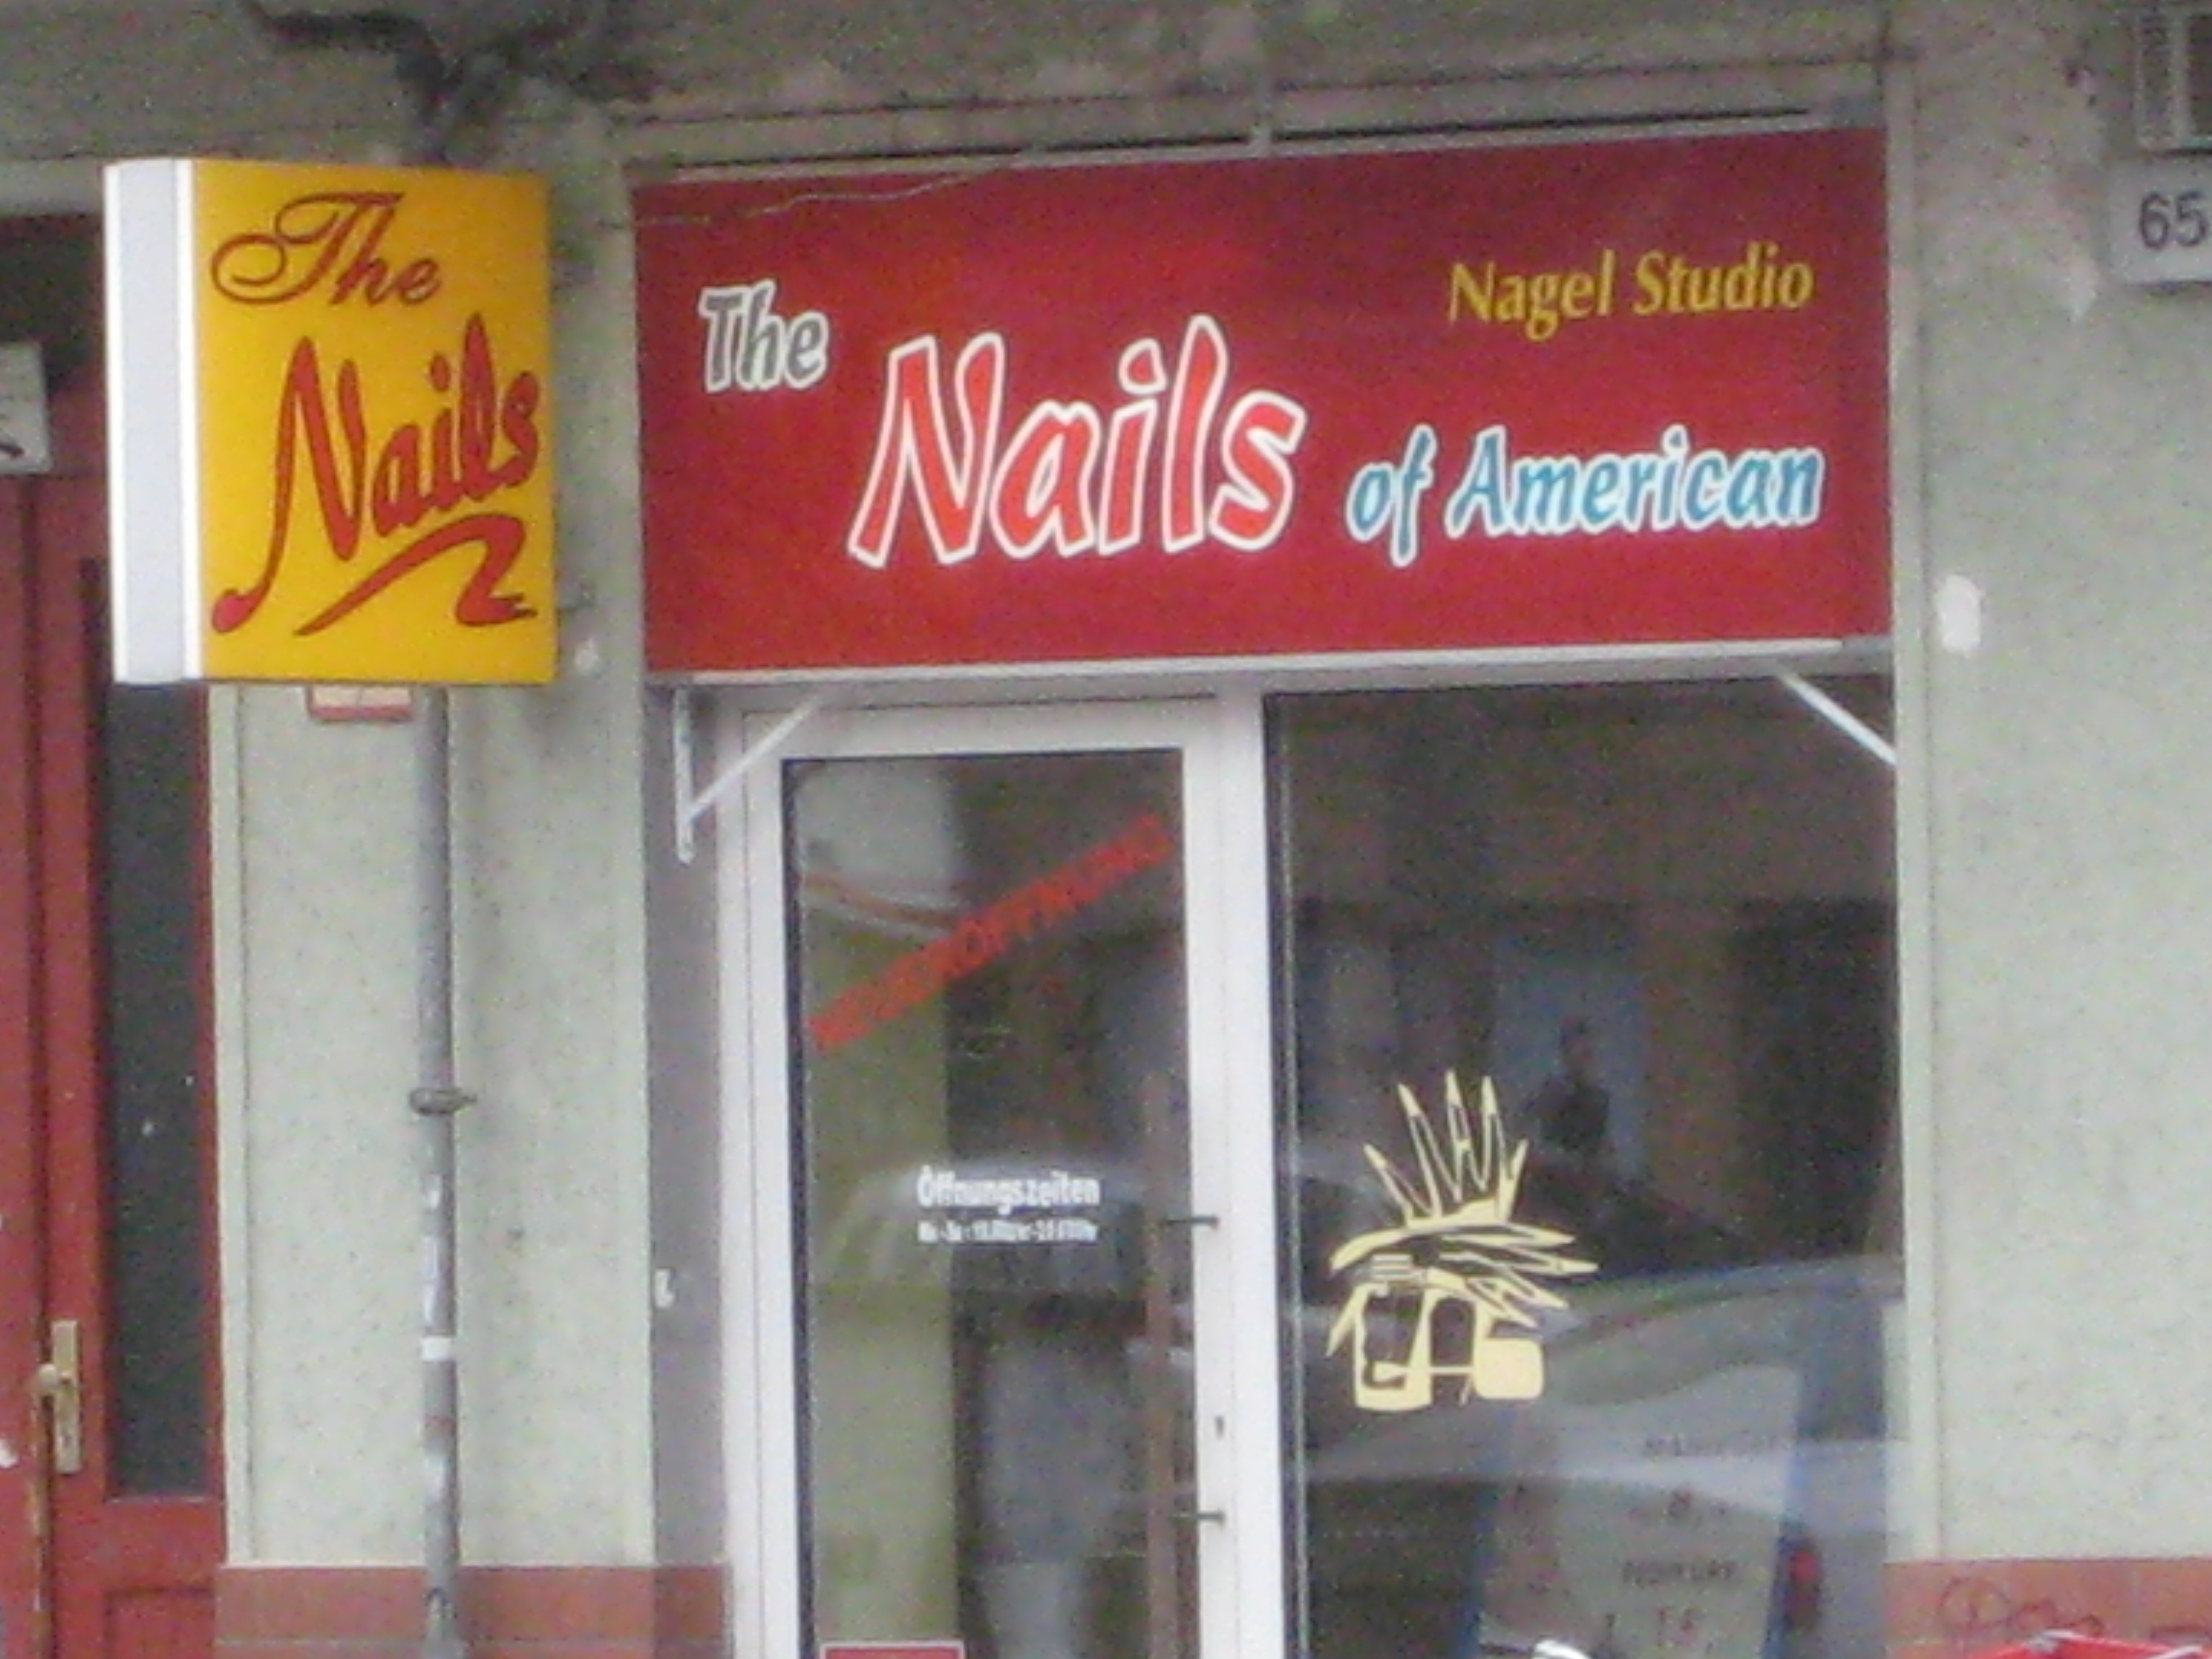 Nail salons are relatively few and far between in Berlin; they appear to be